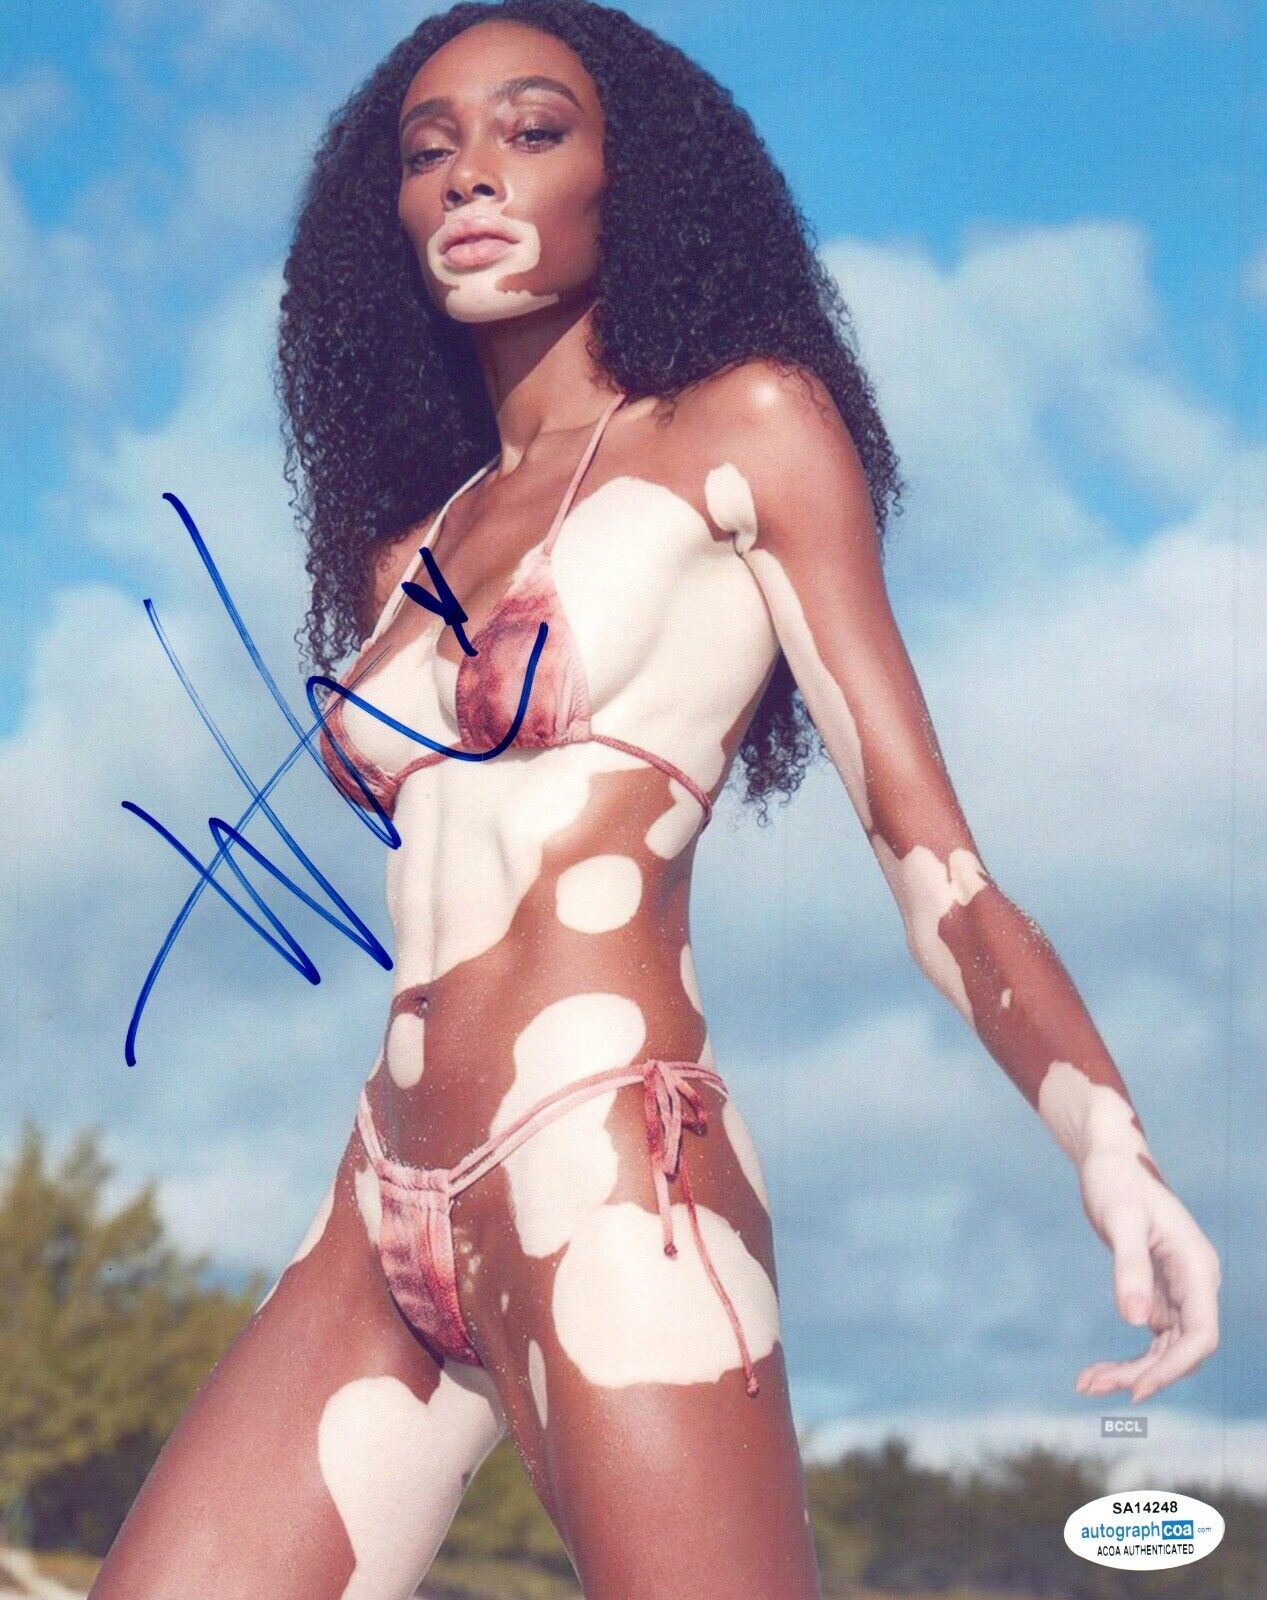 Winnie Harlow Signed Autographed 8x10 Photo Poster painting Sports Illustrated Model ACOA COA